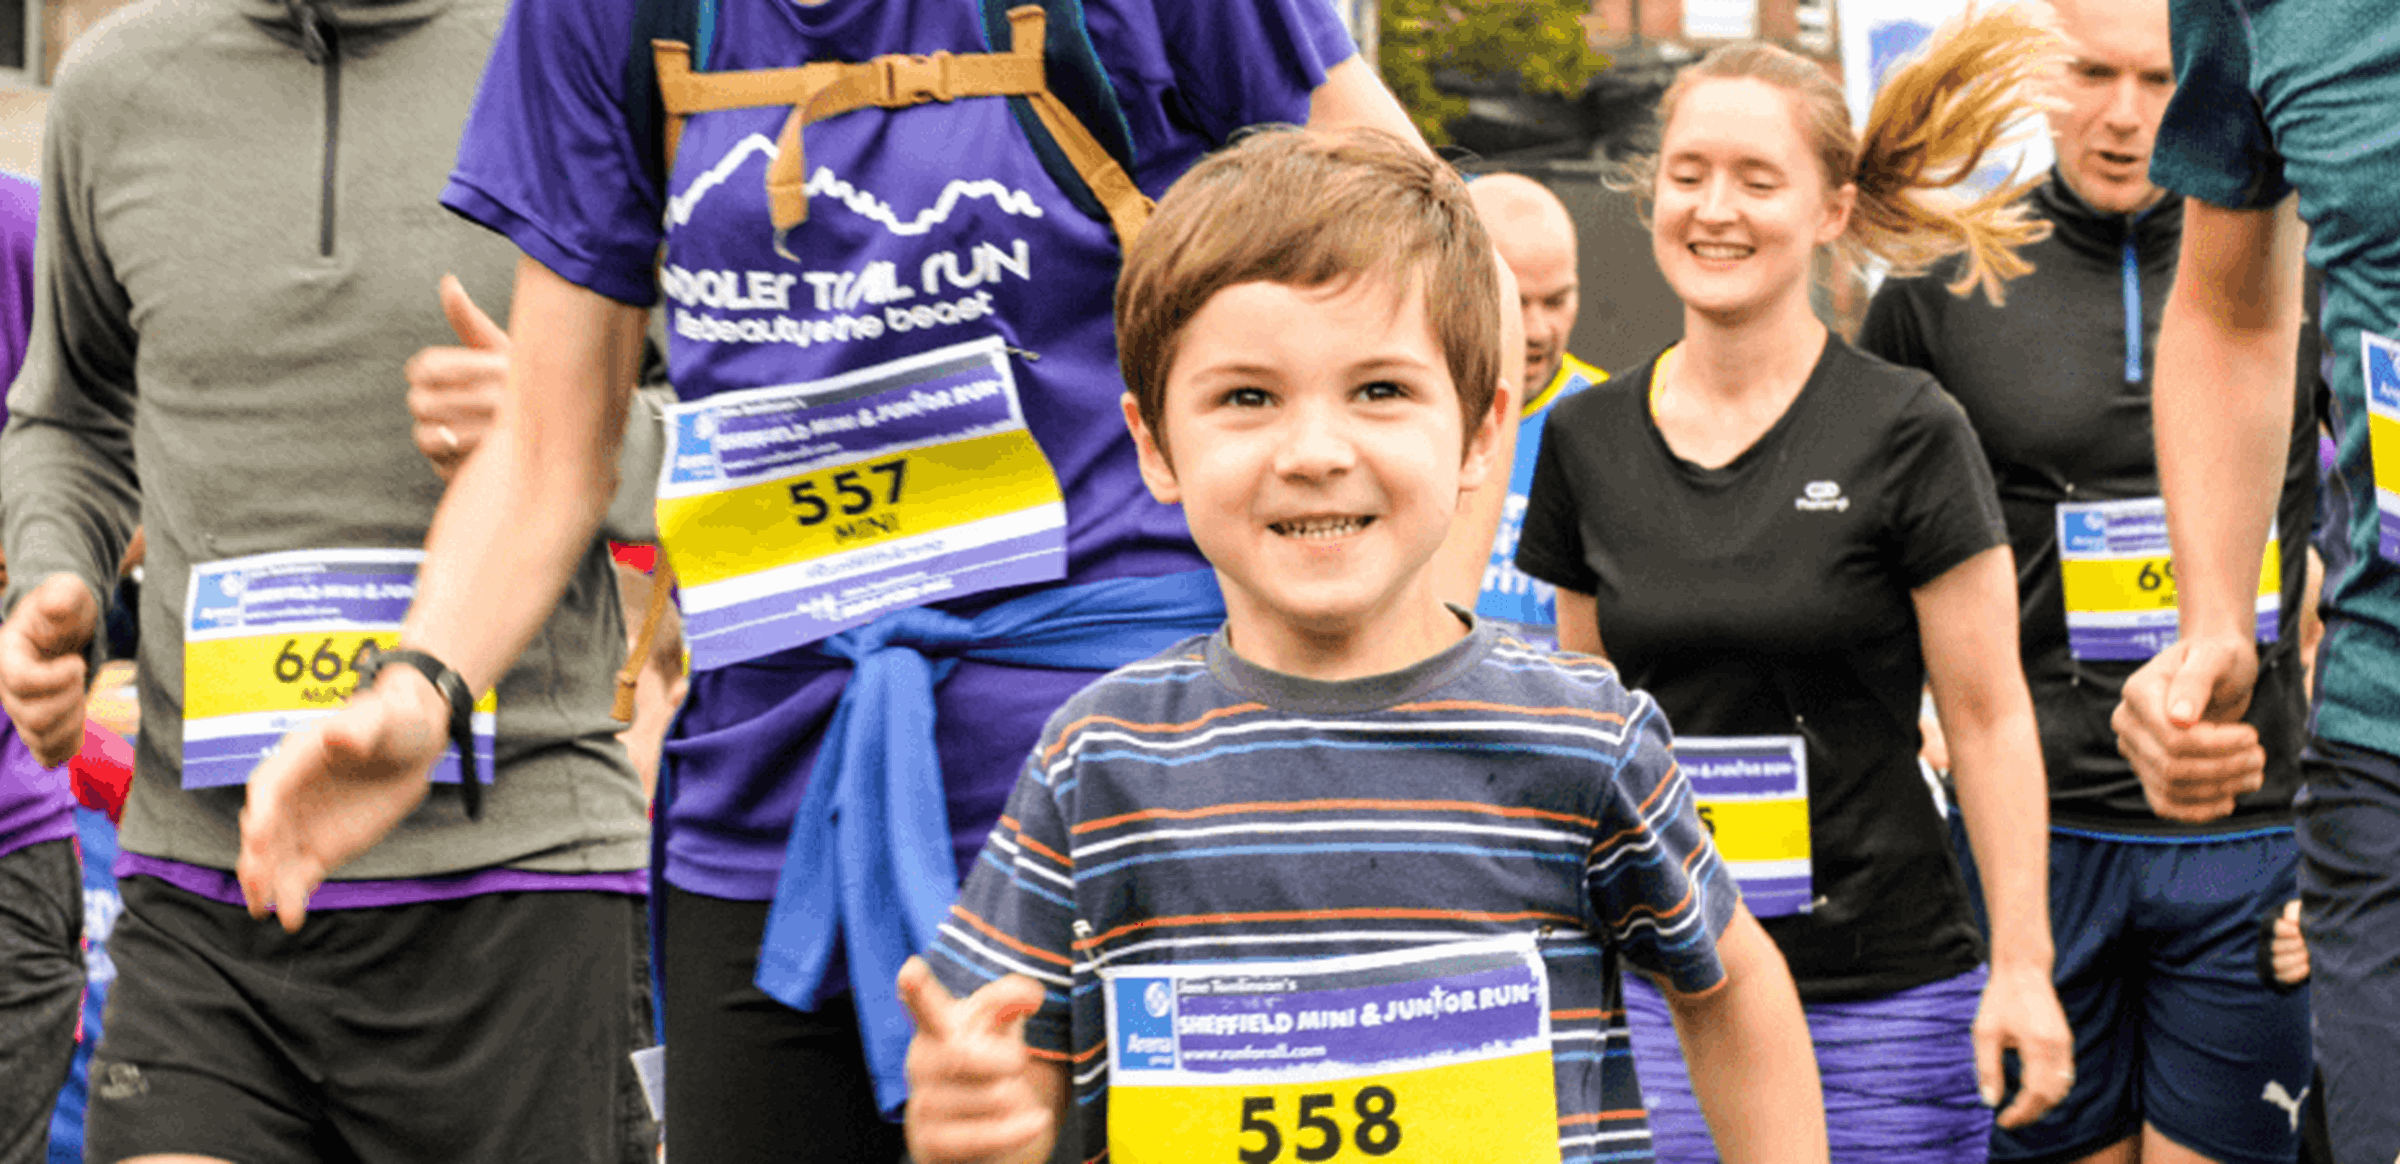 Sheffield Mini and Junior Run sponsored by Xerox Business Solutions